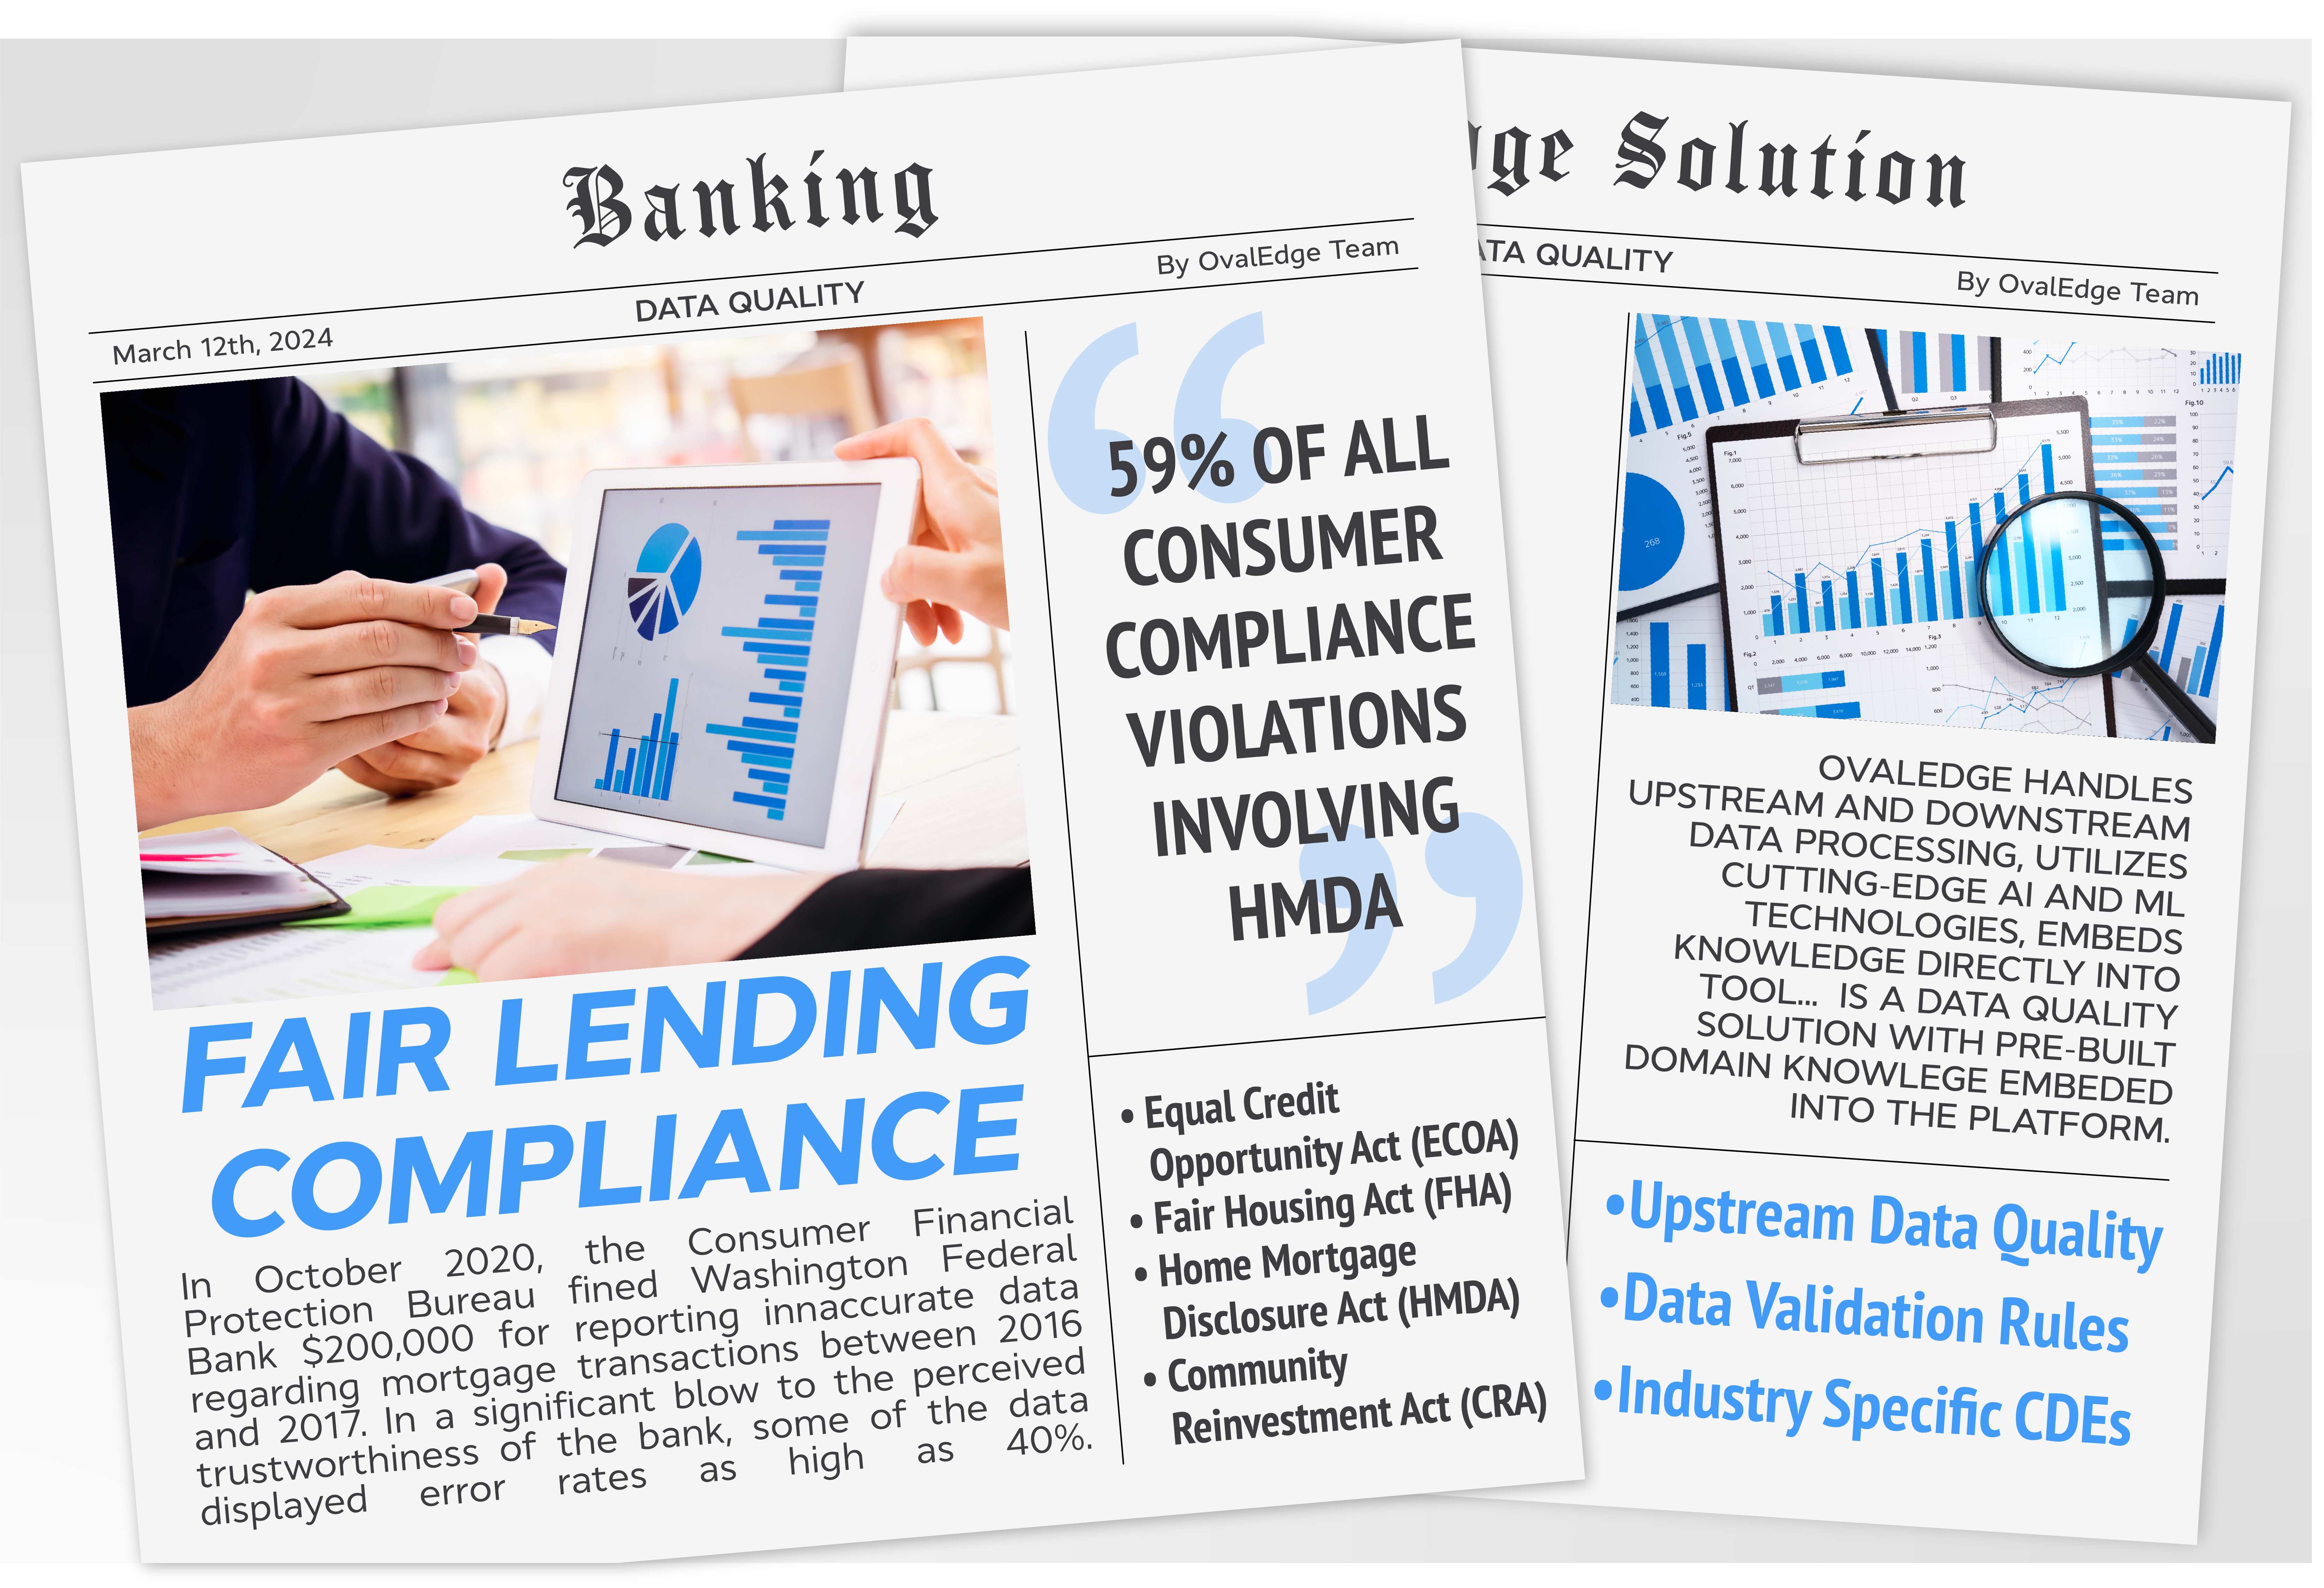 Implementing Data Quality for Fair Lending Compliance in Banking